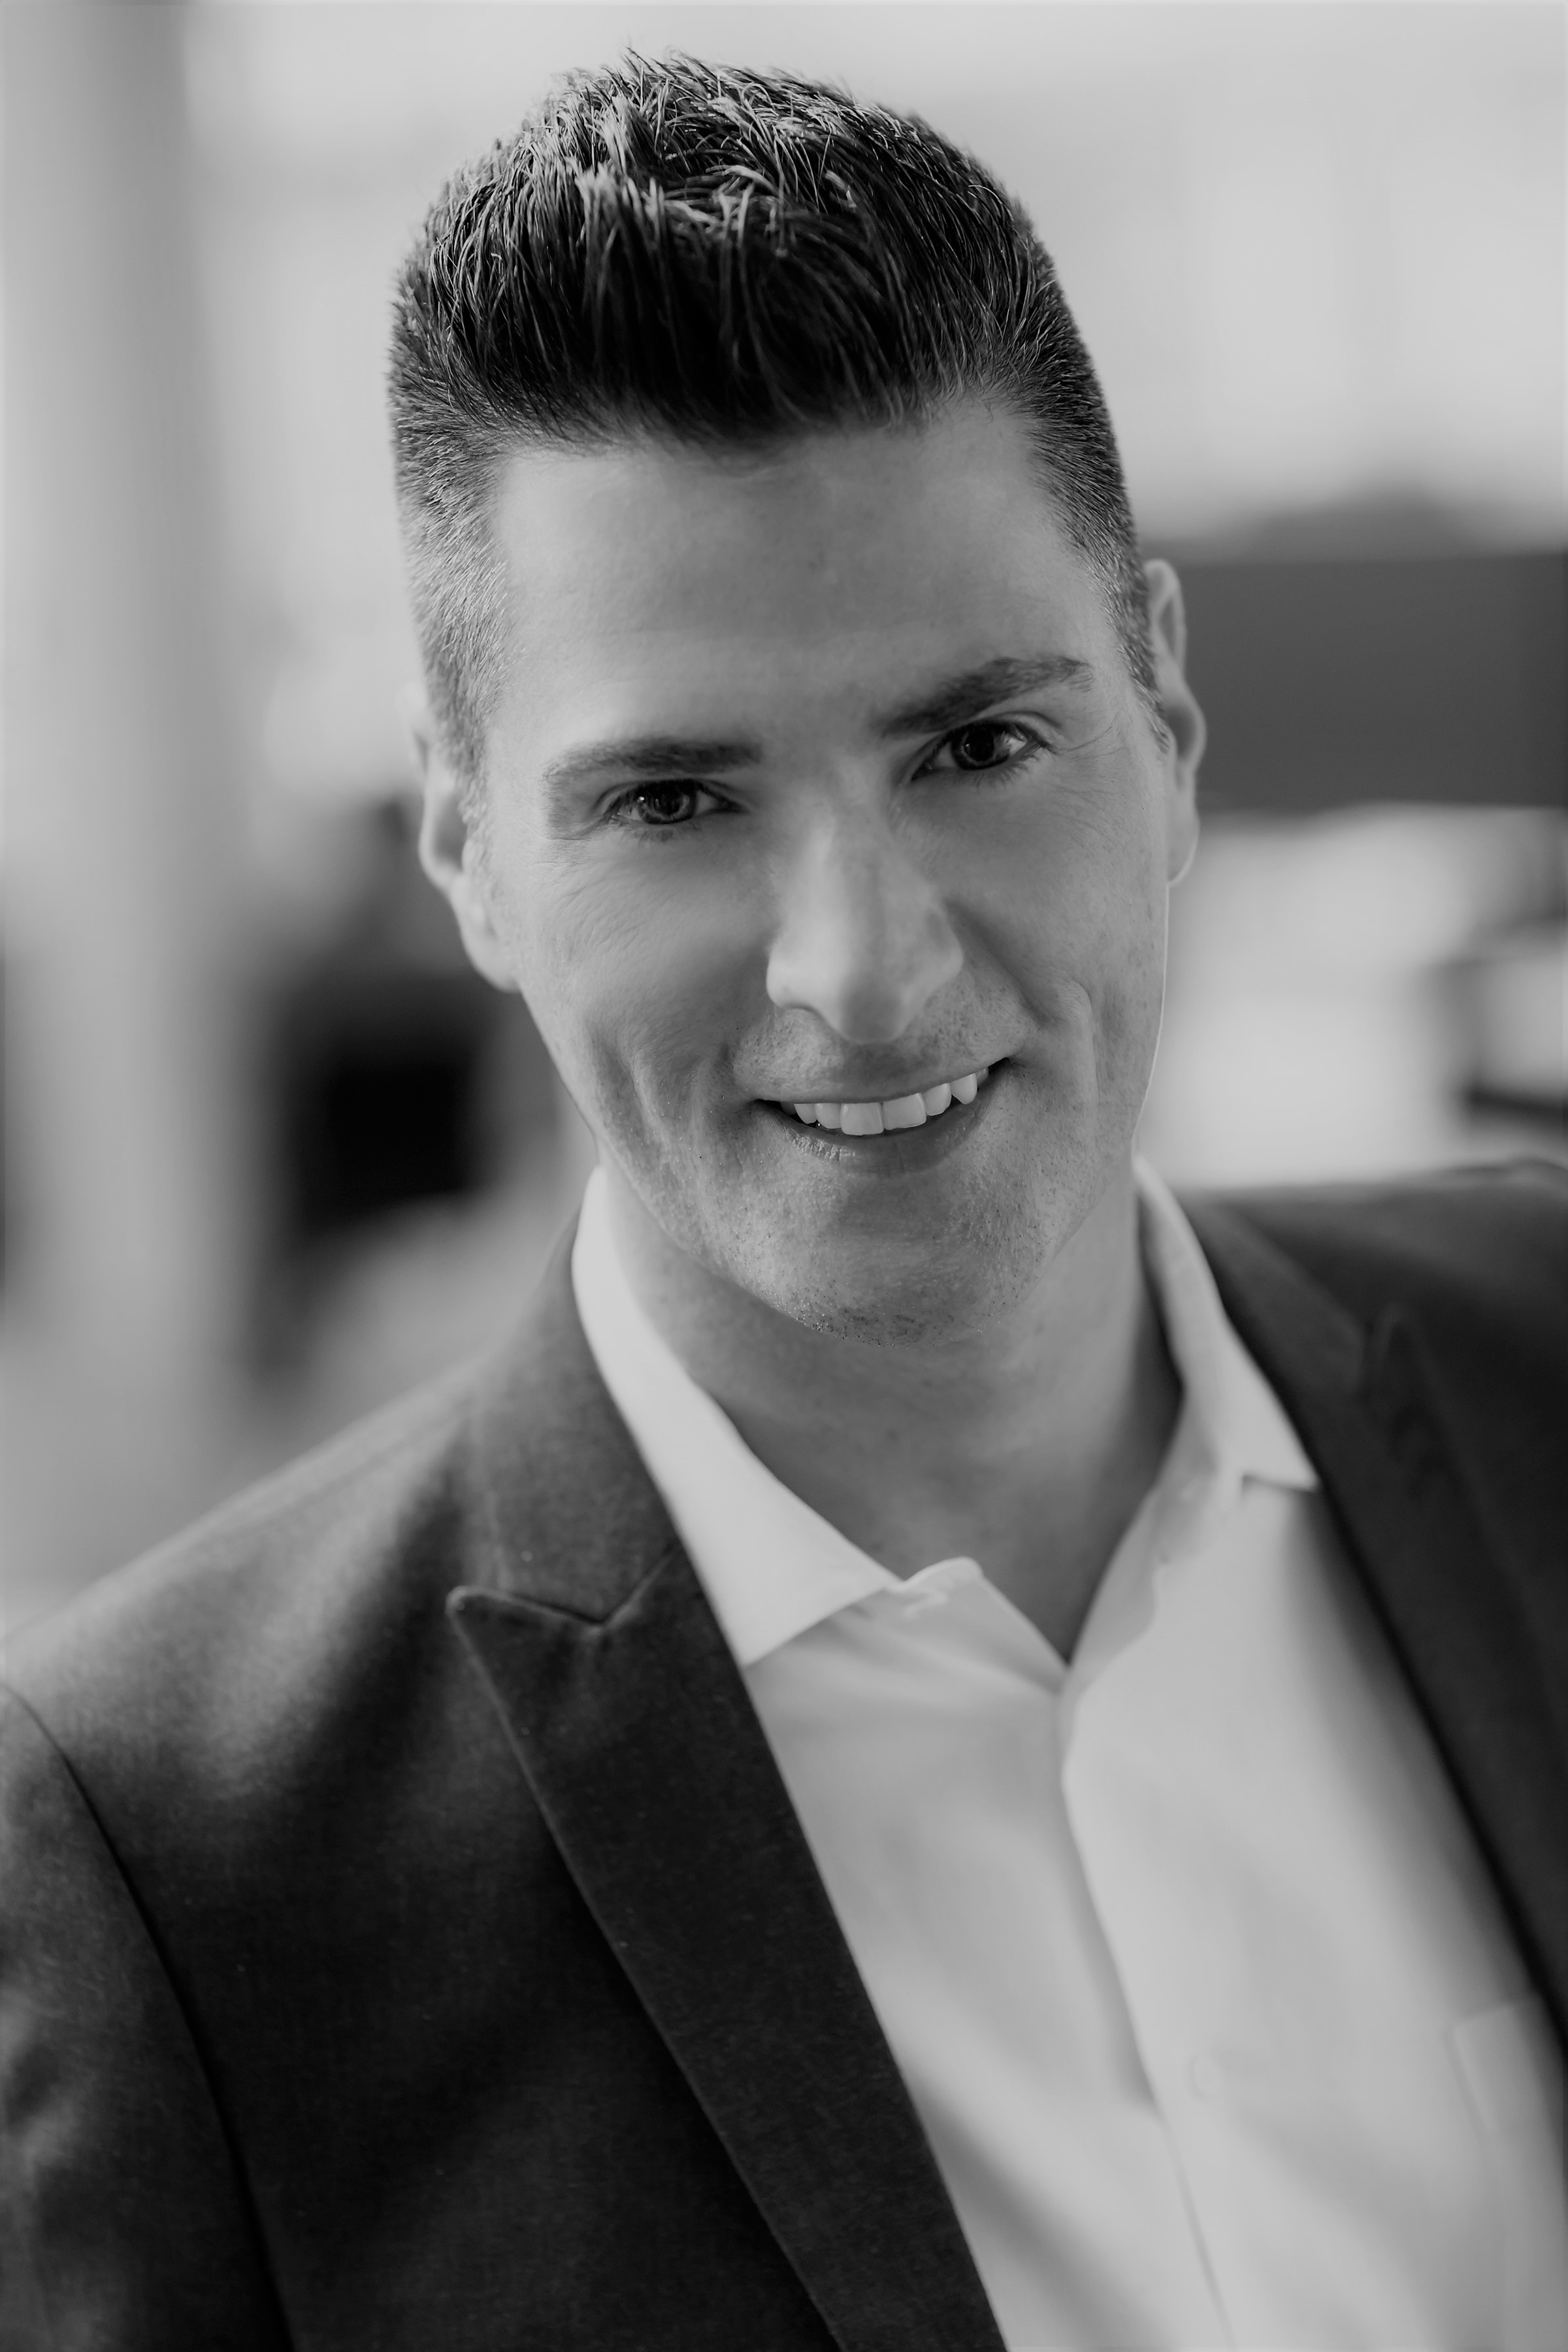 Head shot of Anthony Salcito wearing a suit and tie